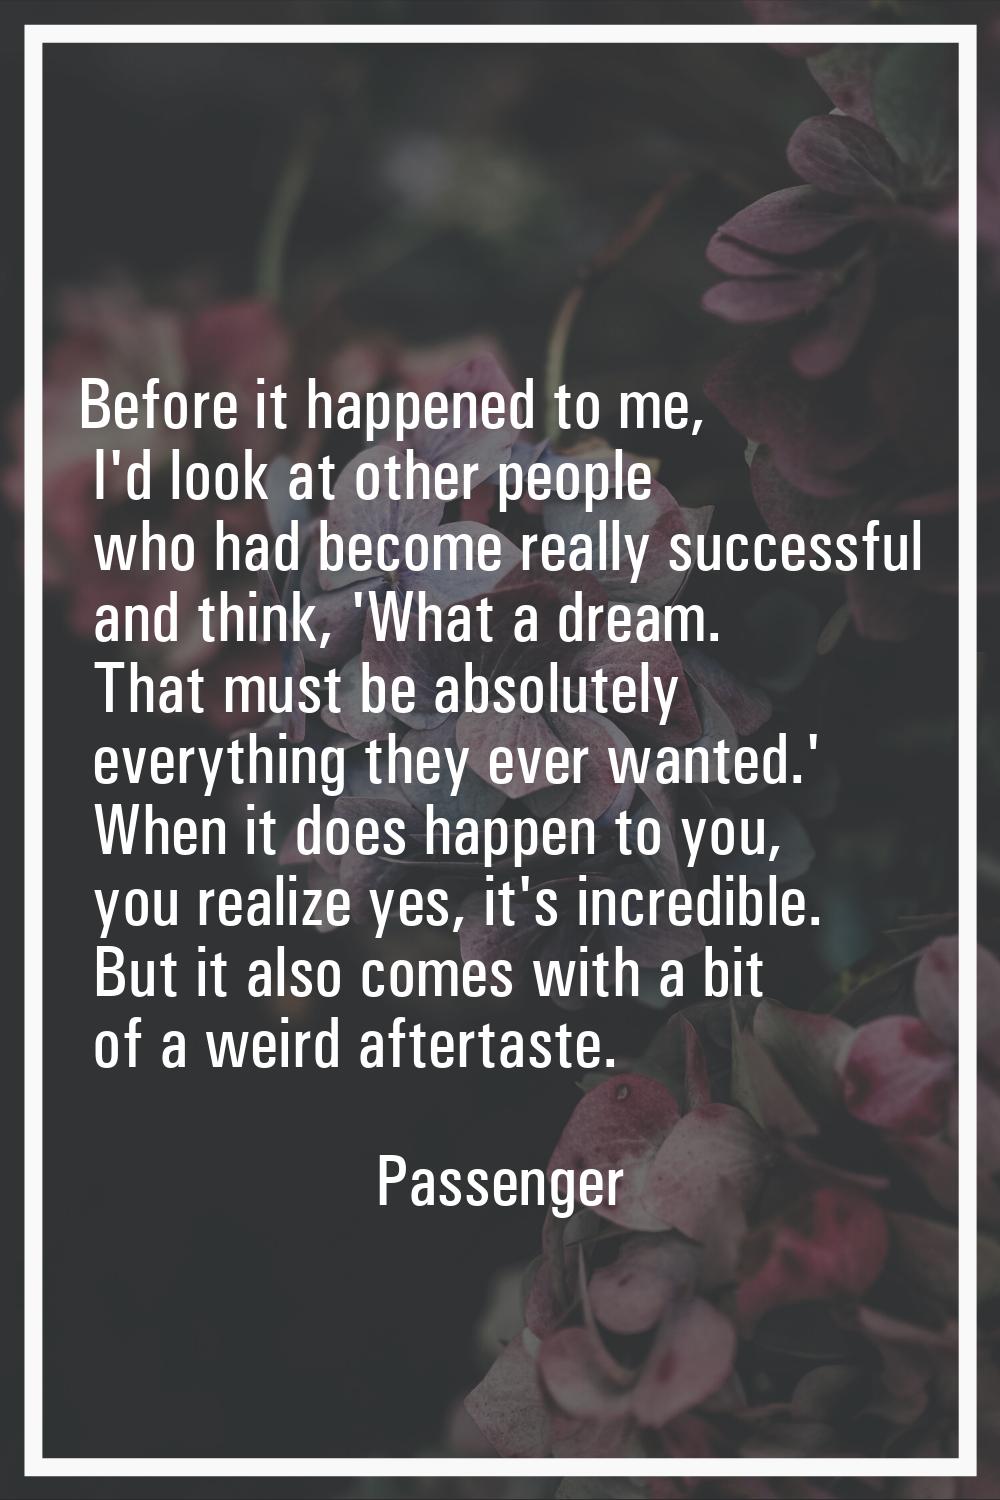 Before it happened to me, I'd look at other people who had become really successful and think, 'Wha